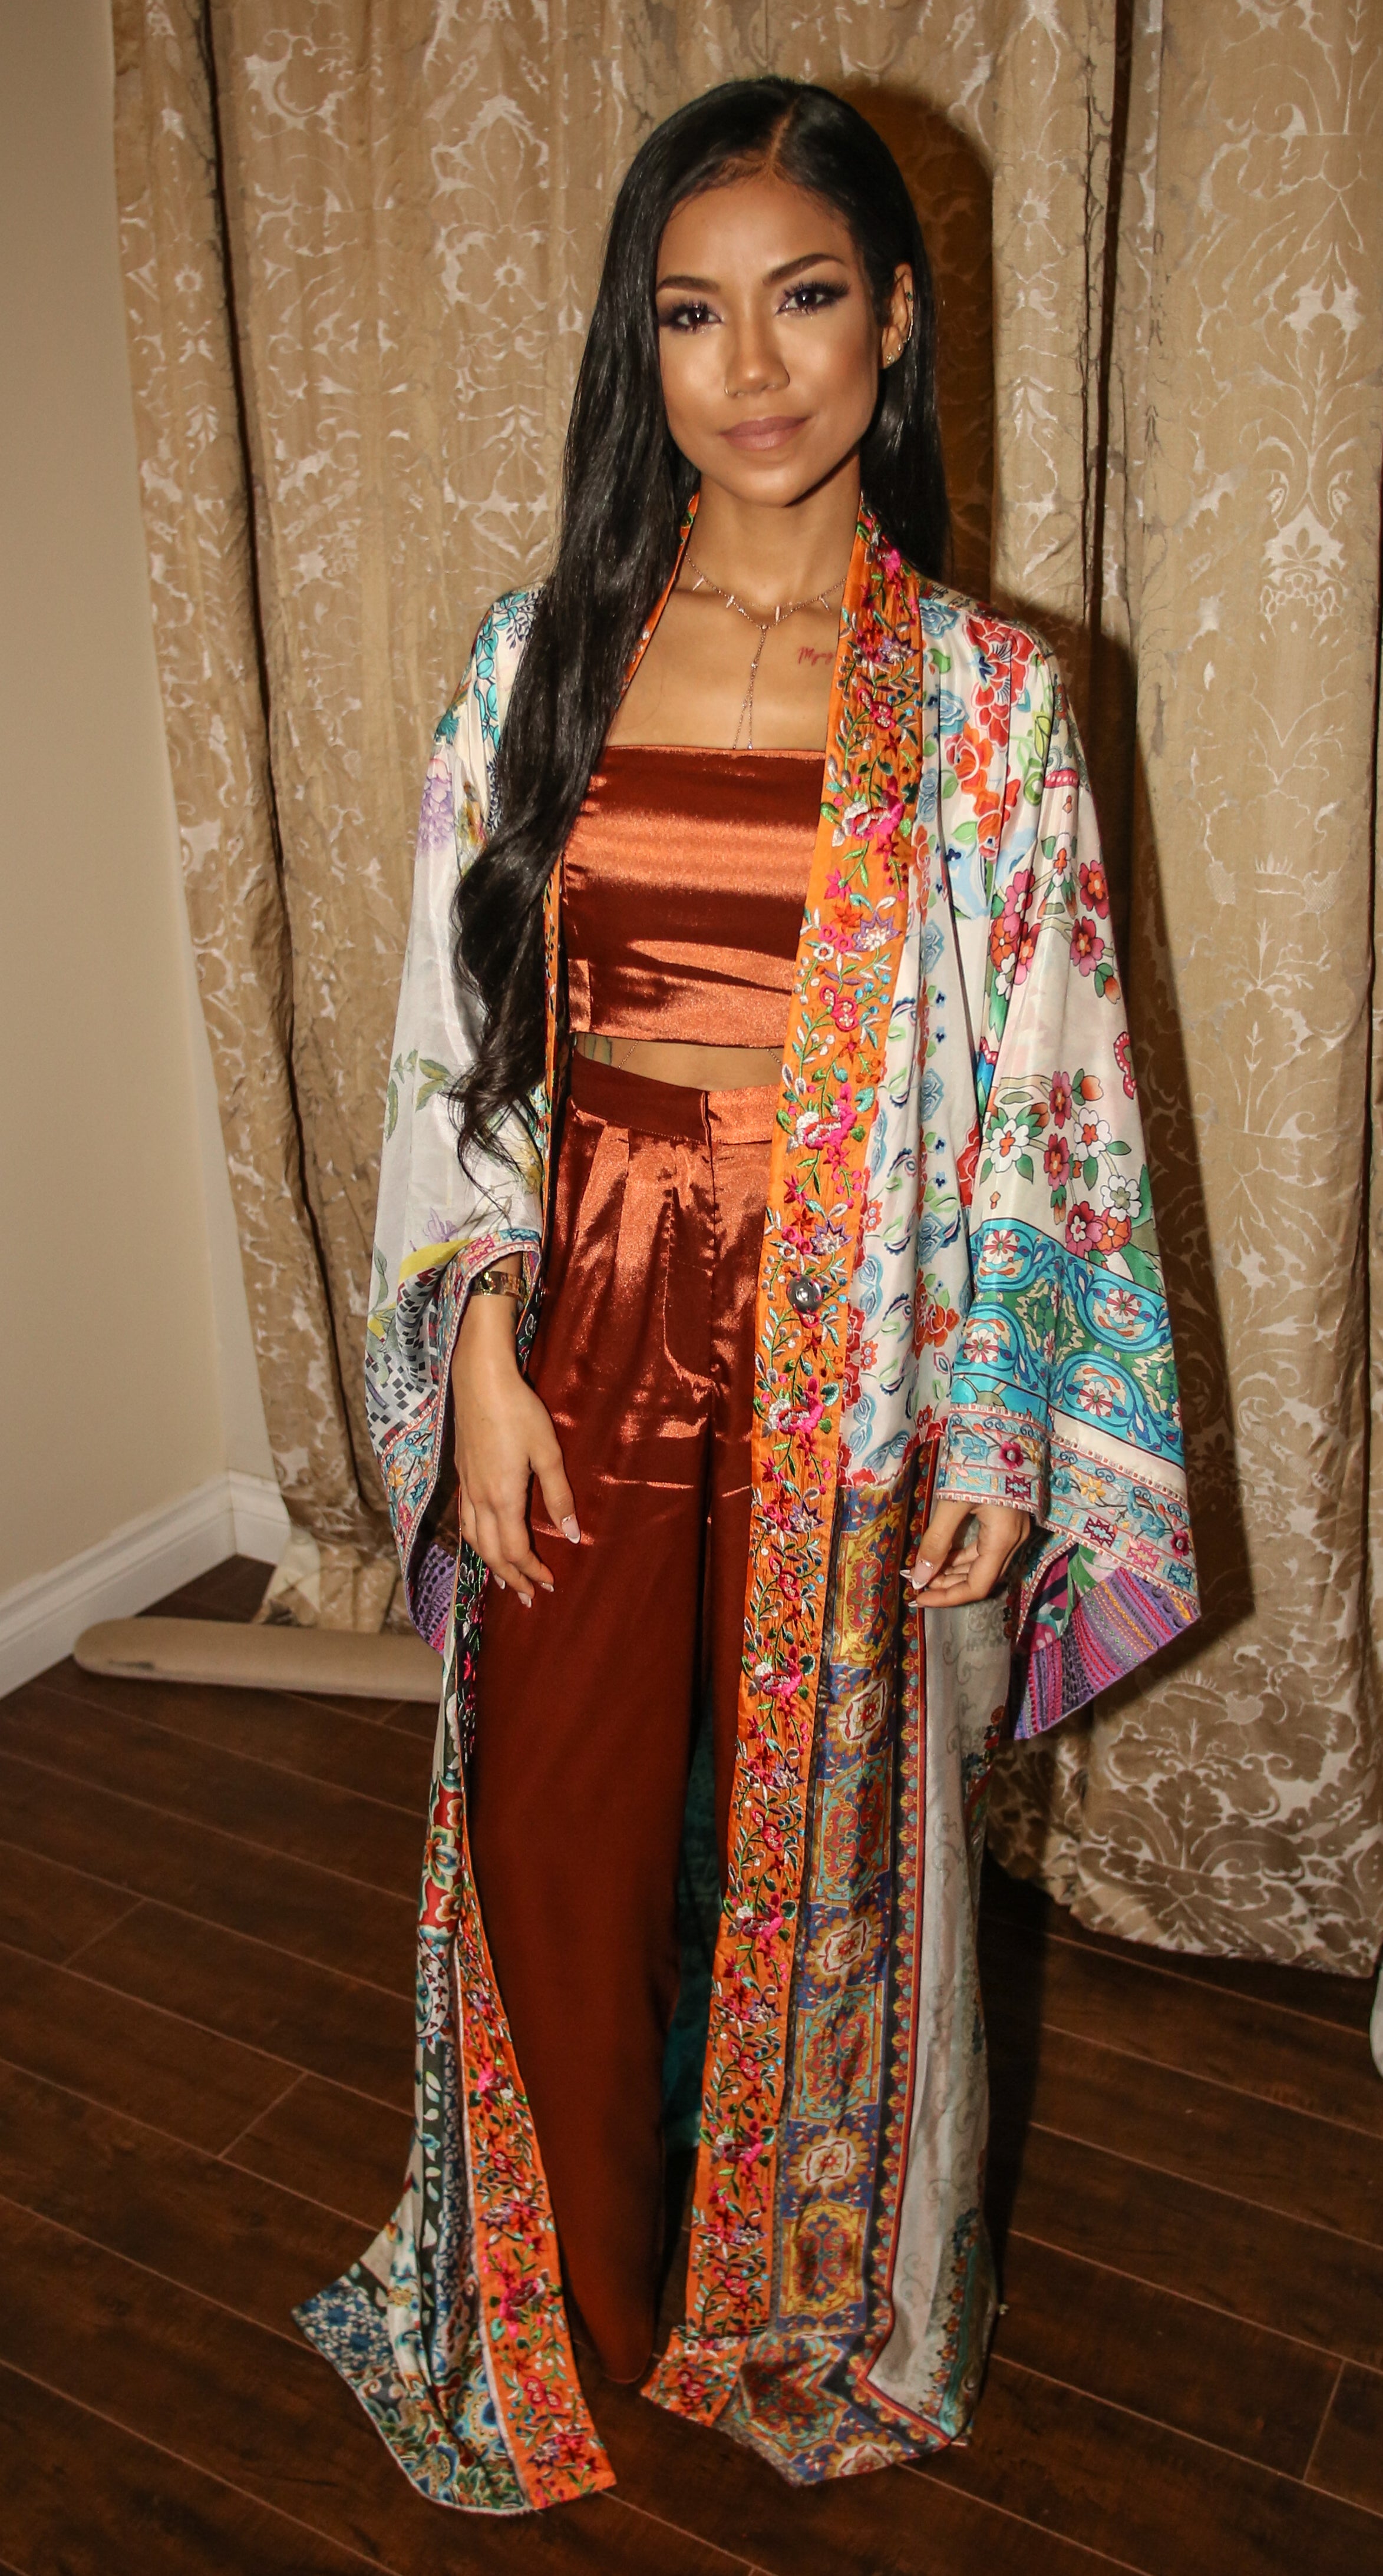 Happy Birthday! 15 Photos That Prove Jhene Aiko is a Style Chameleon
